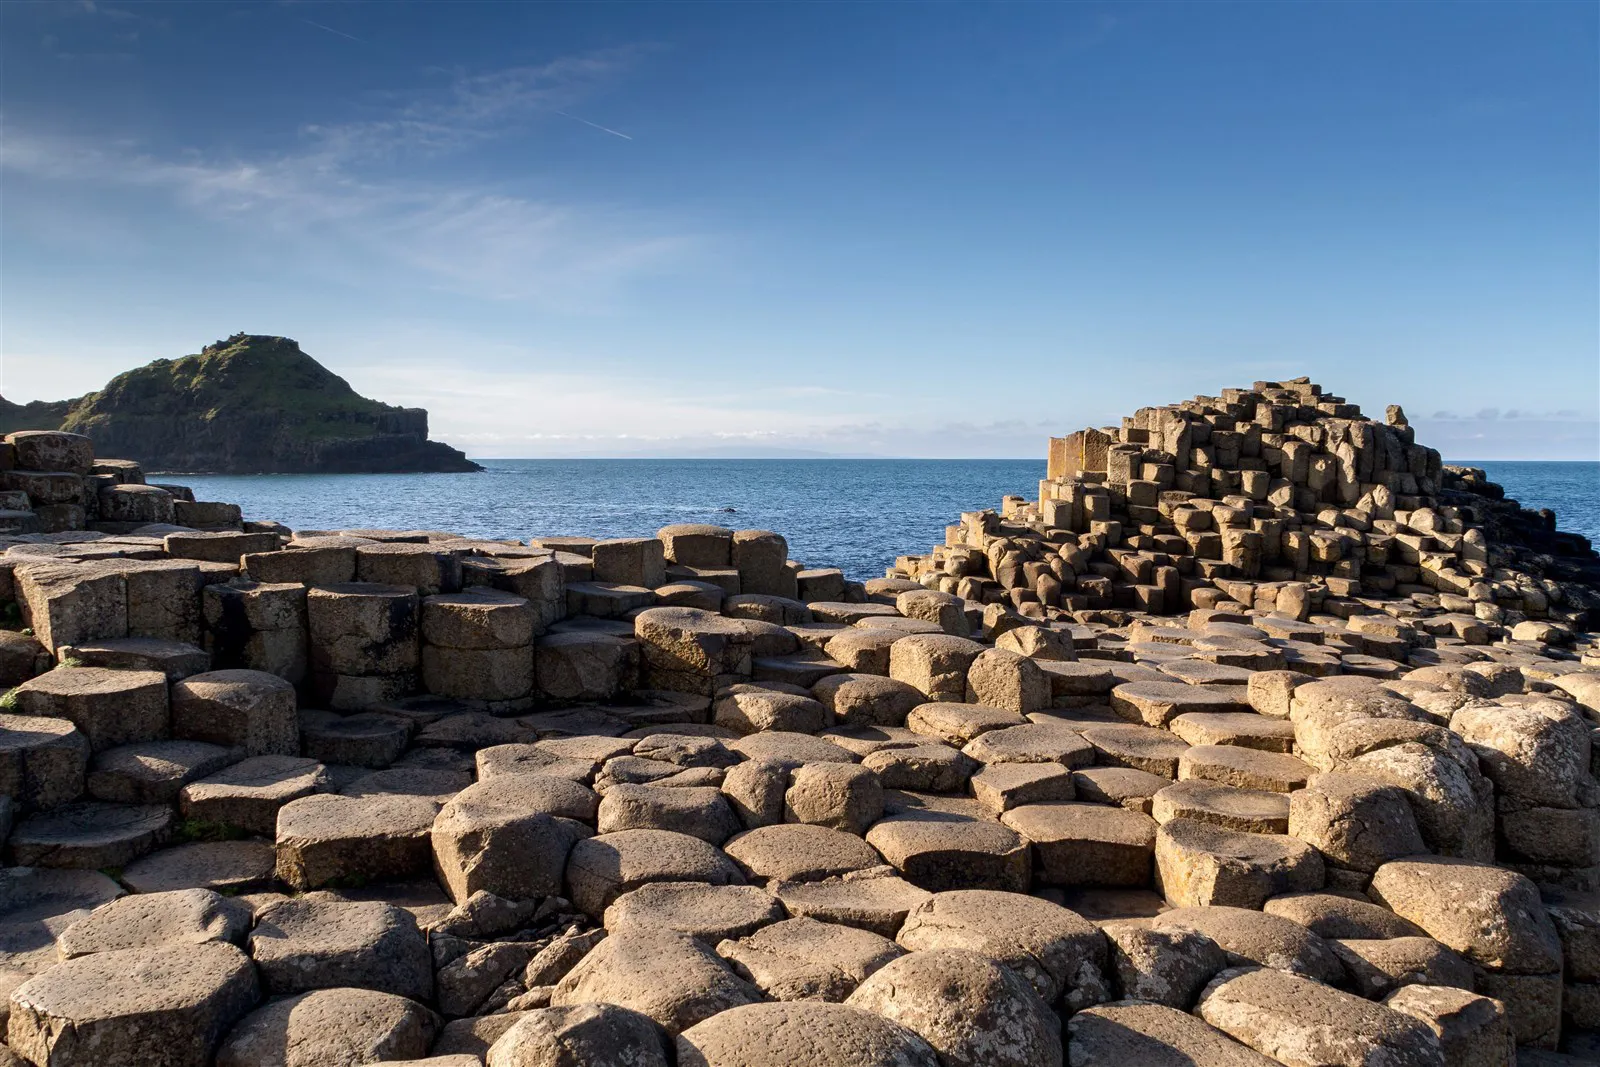 The National Trust site of Giant's Causeway in Northern Ireland